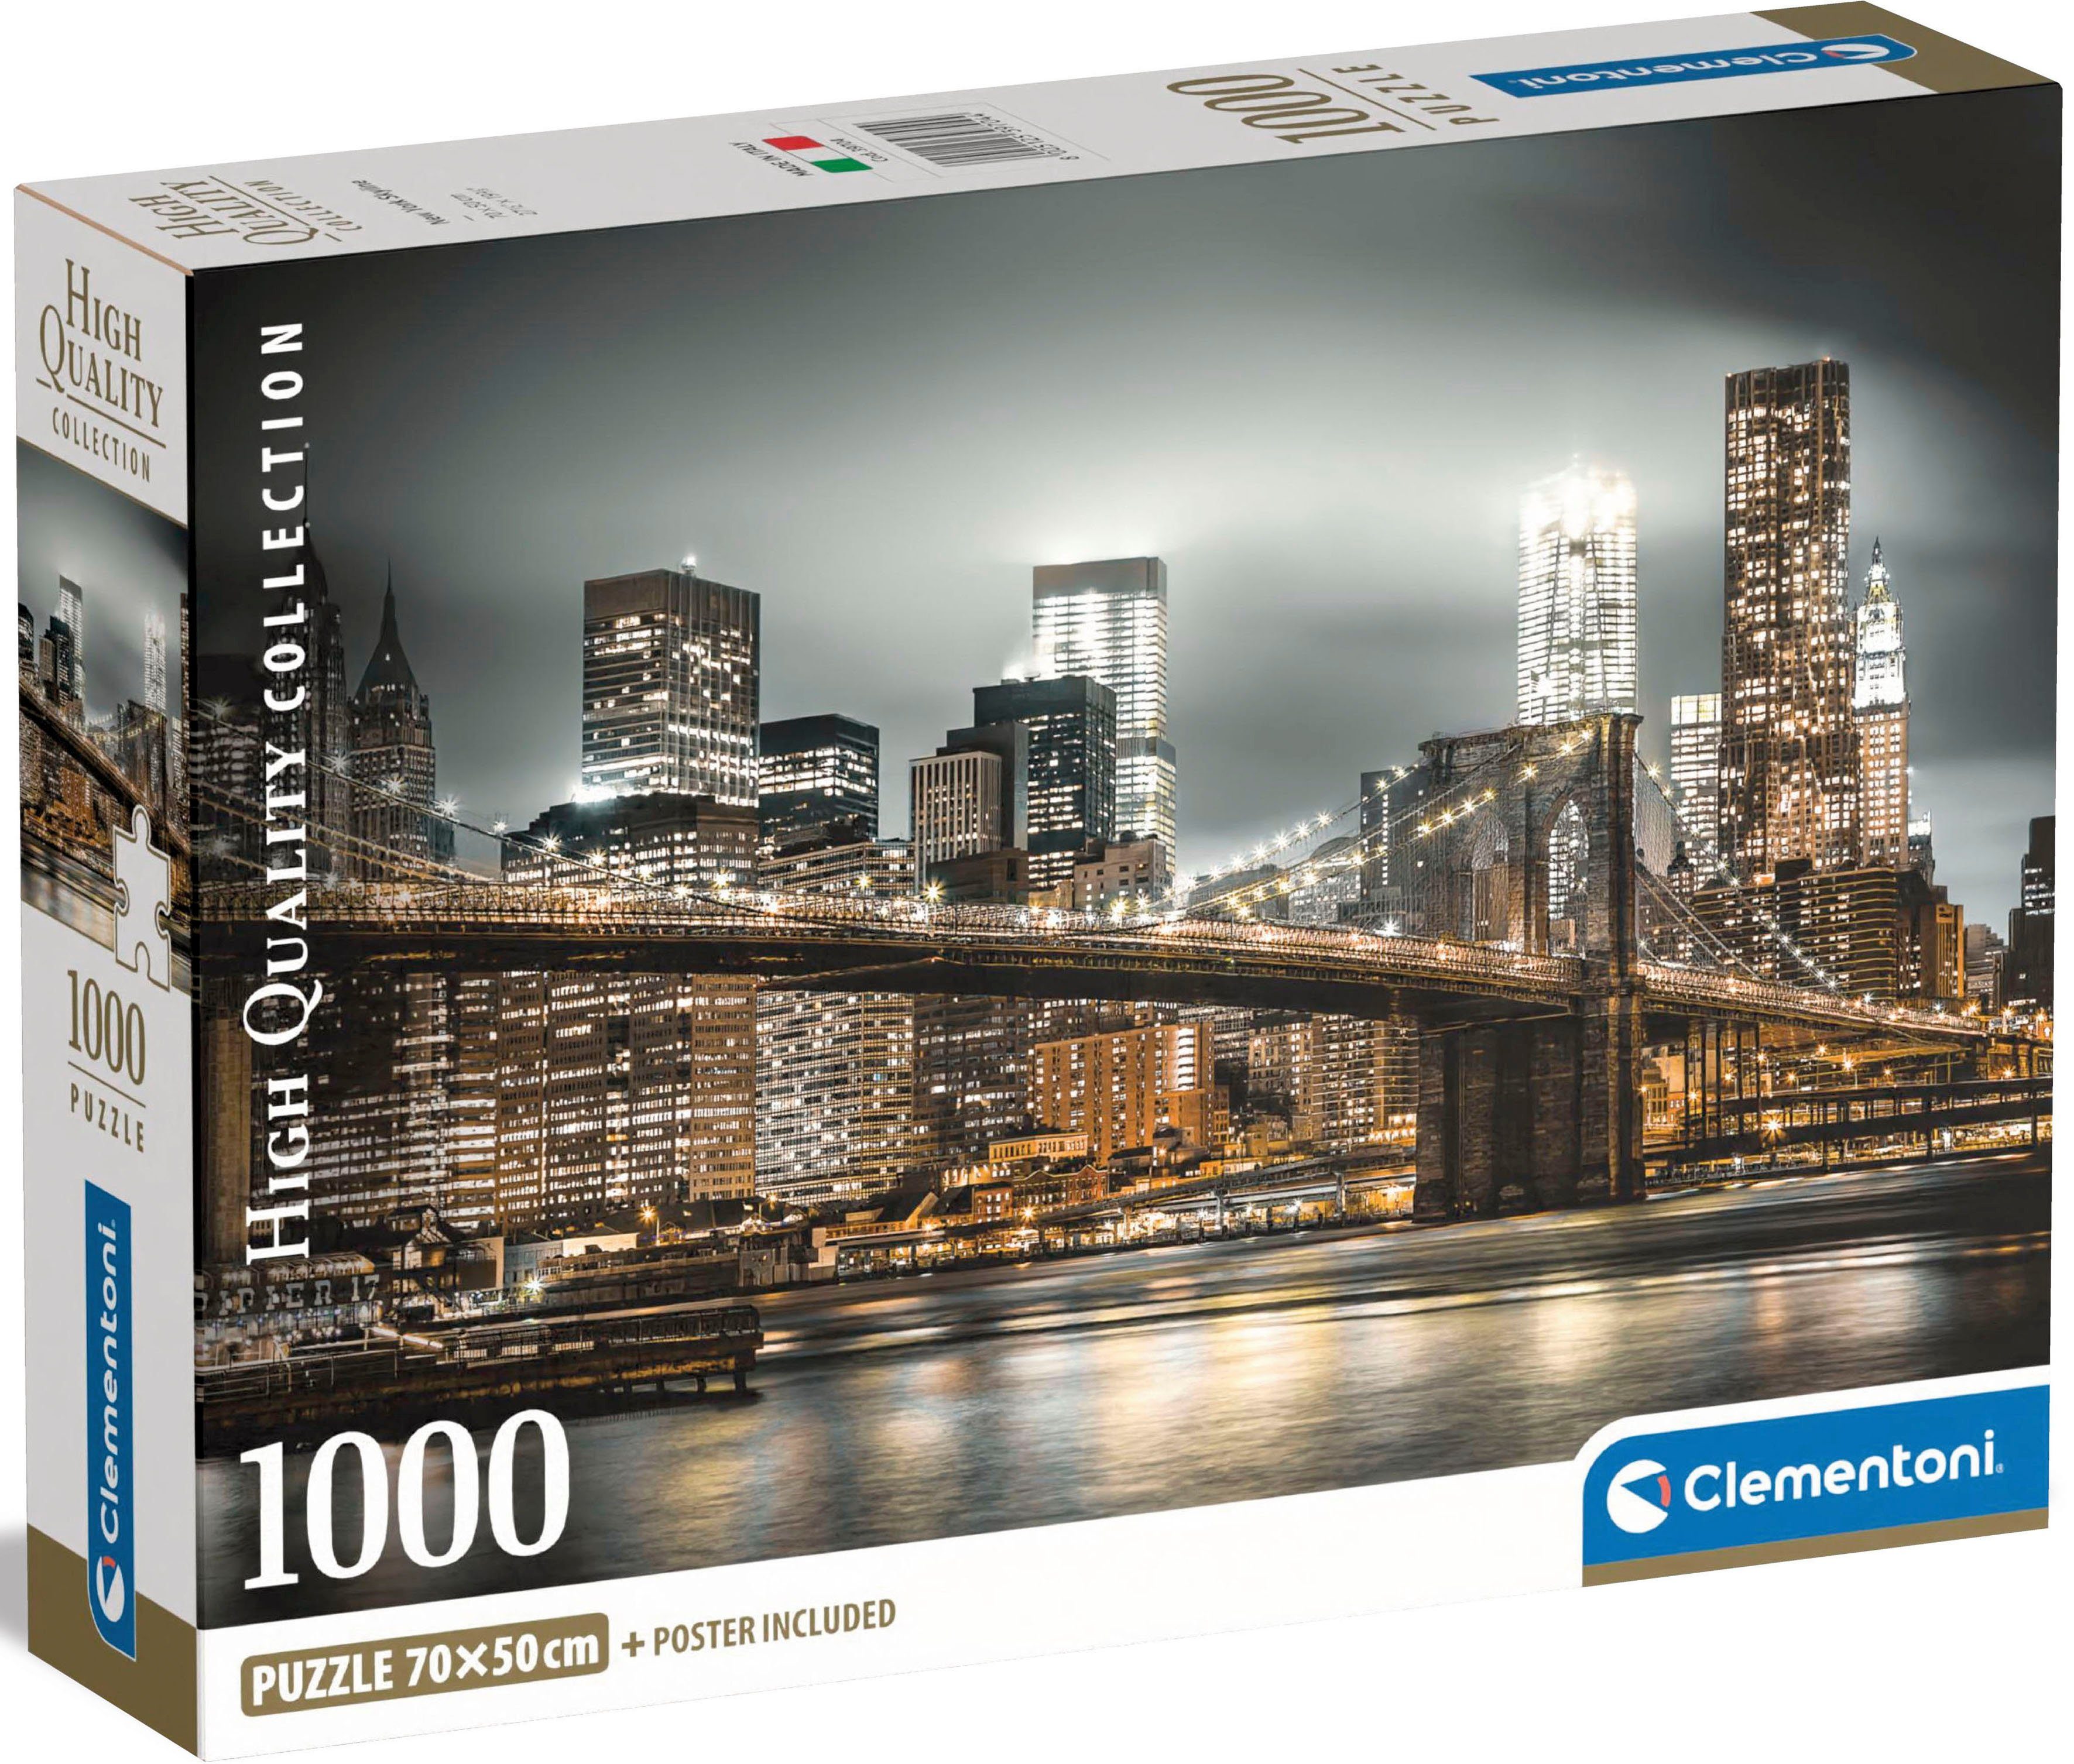 Clementoni® Puzzle High Quality 1000 in Made York FSC® - Collection Wald weltweit Skyline, Puzzleteile, Compact, New Europe; - schützt